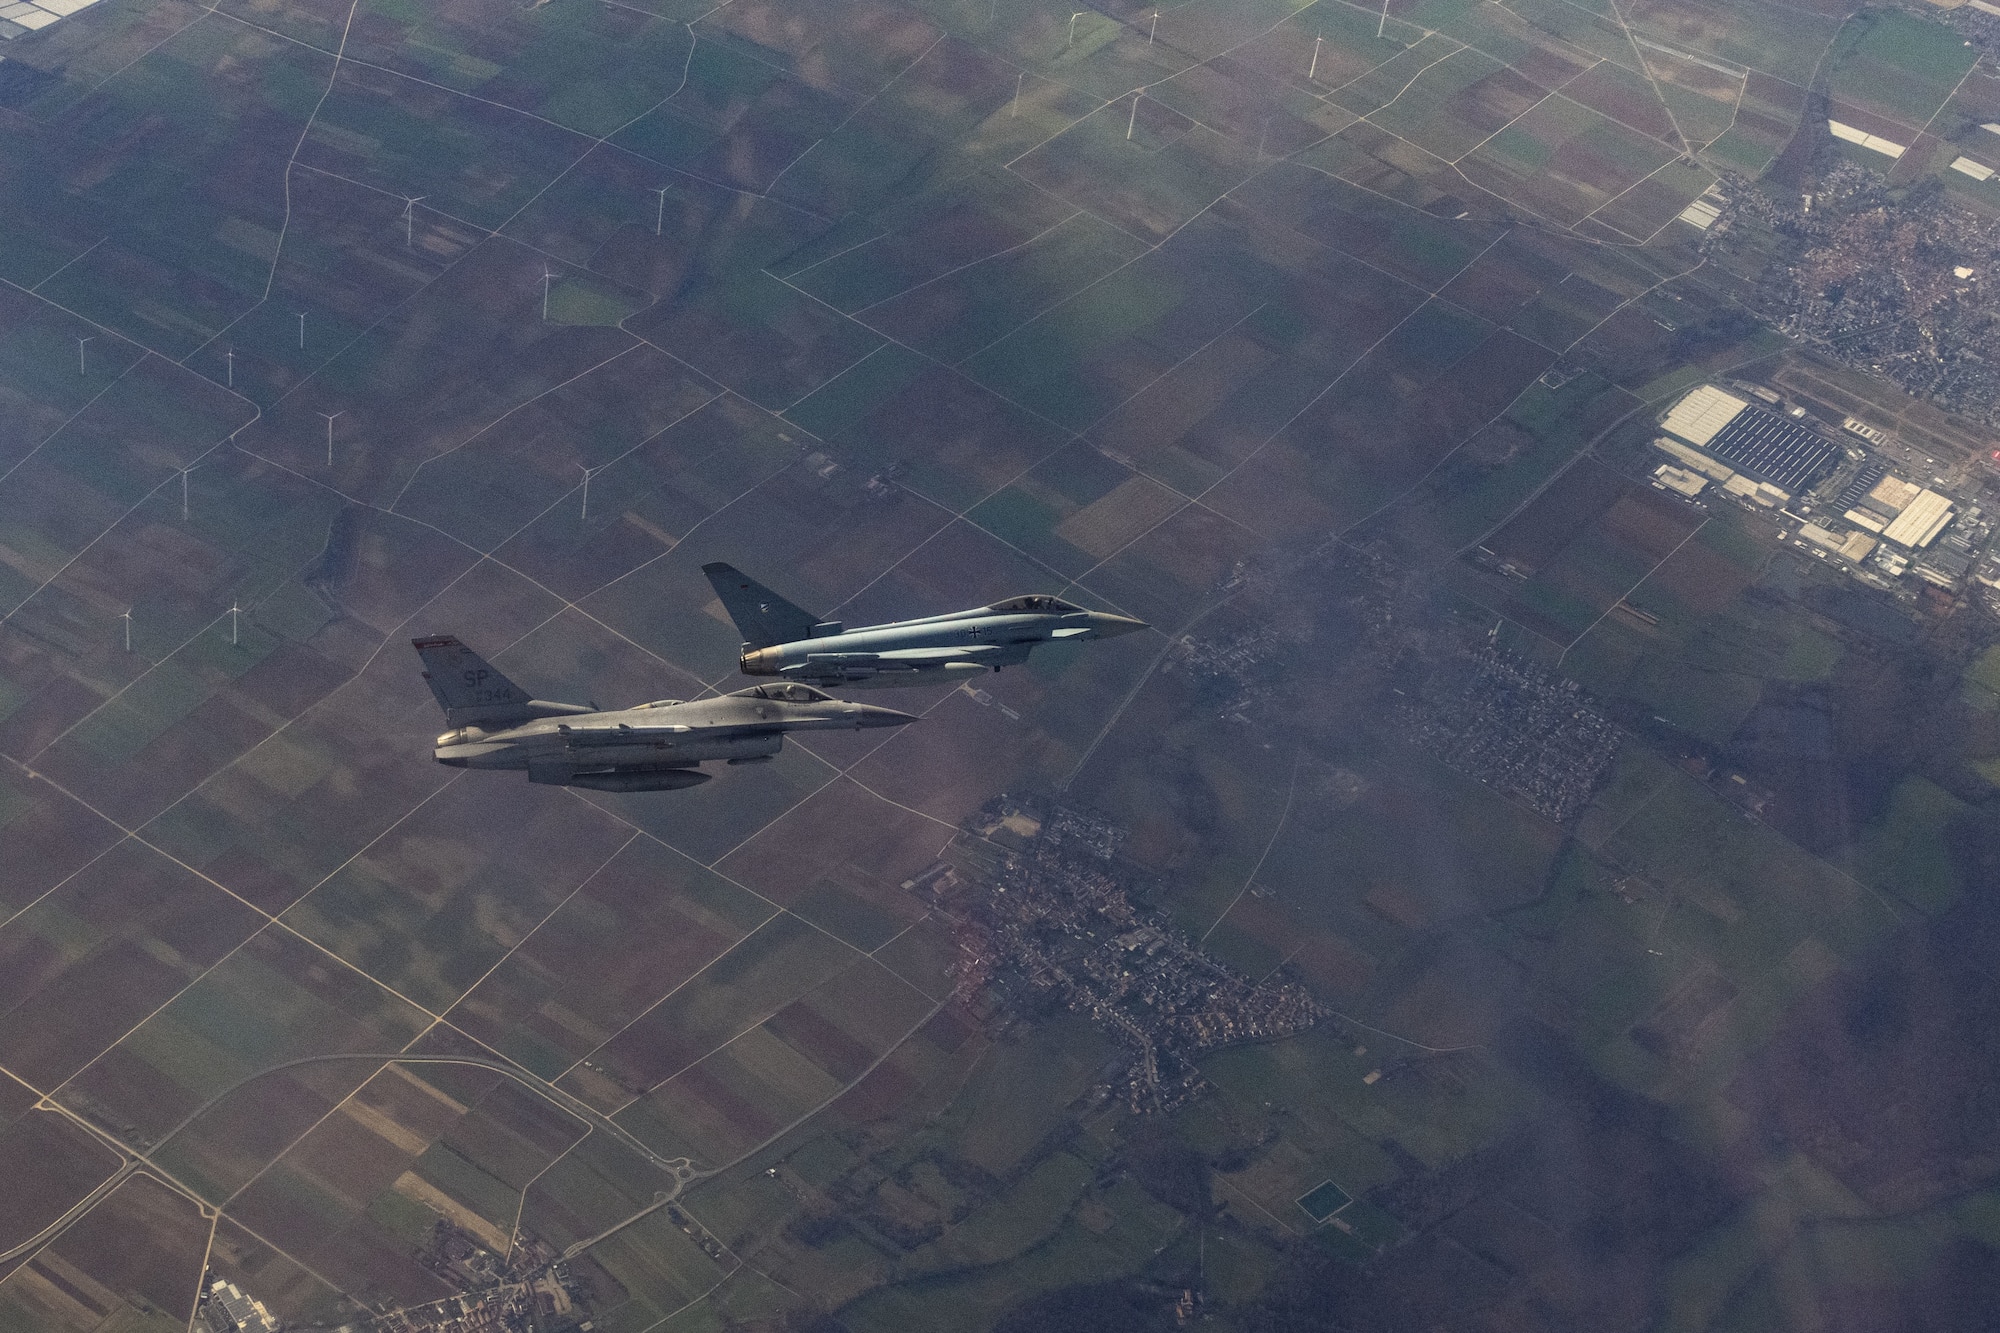 A U.S. Air Force F-16 Fighting Falcon assigned to the 480th Fighter Squadron at Spangdahlem Air Base, Germany (left), flies alongside a German air force Eurofighter Typhoon assigned to the 74th Tactical Air Wing over Germany, Feb. 16, 2023.